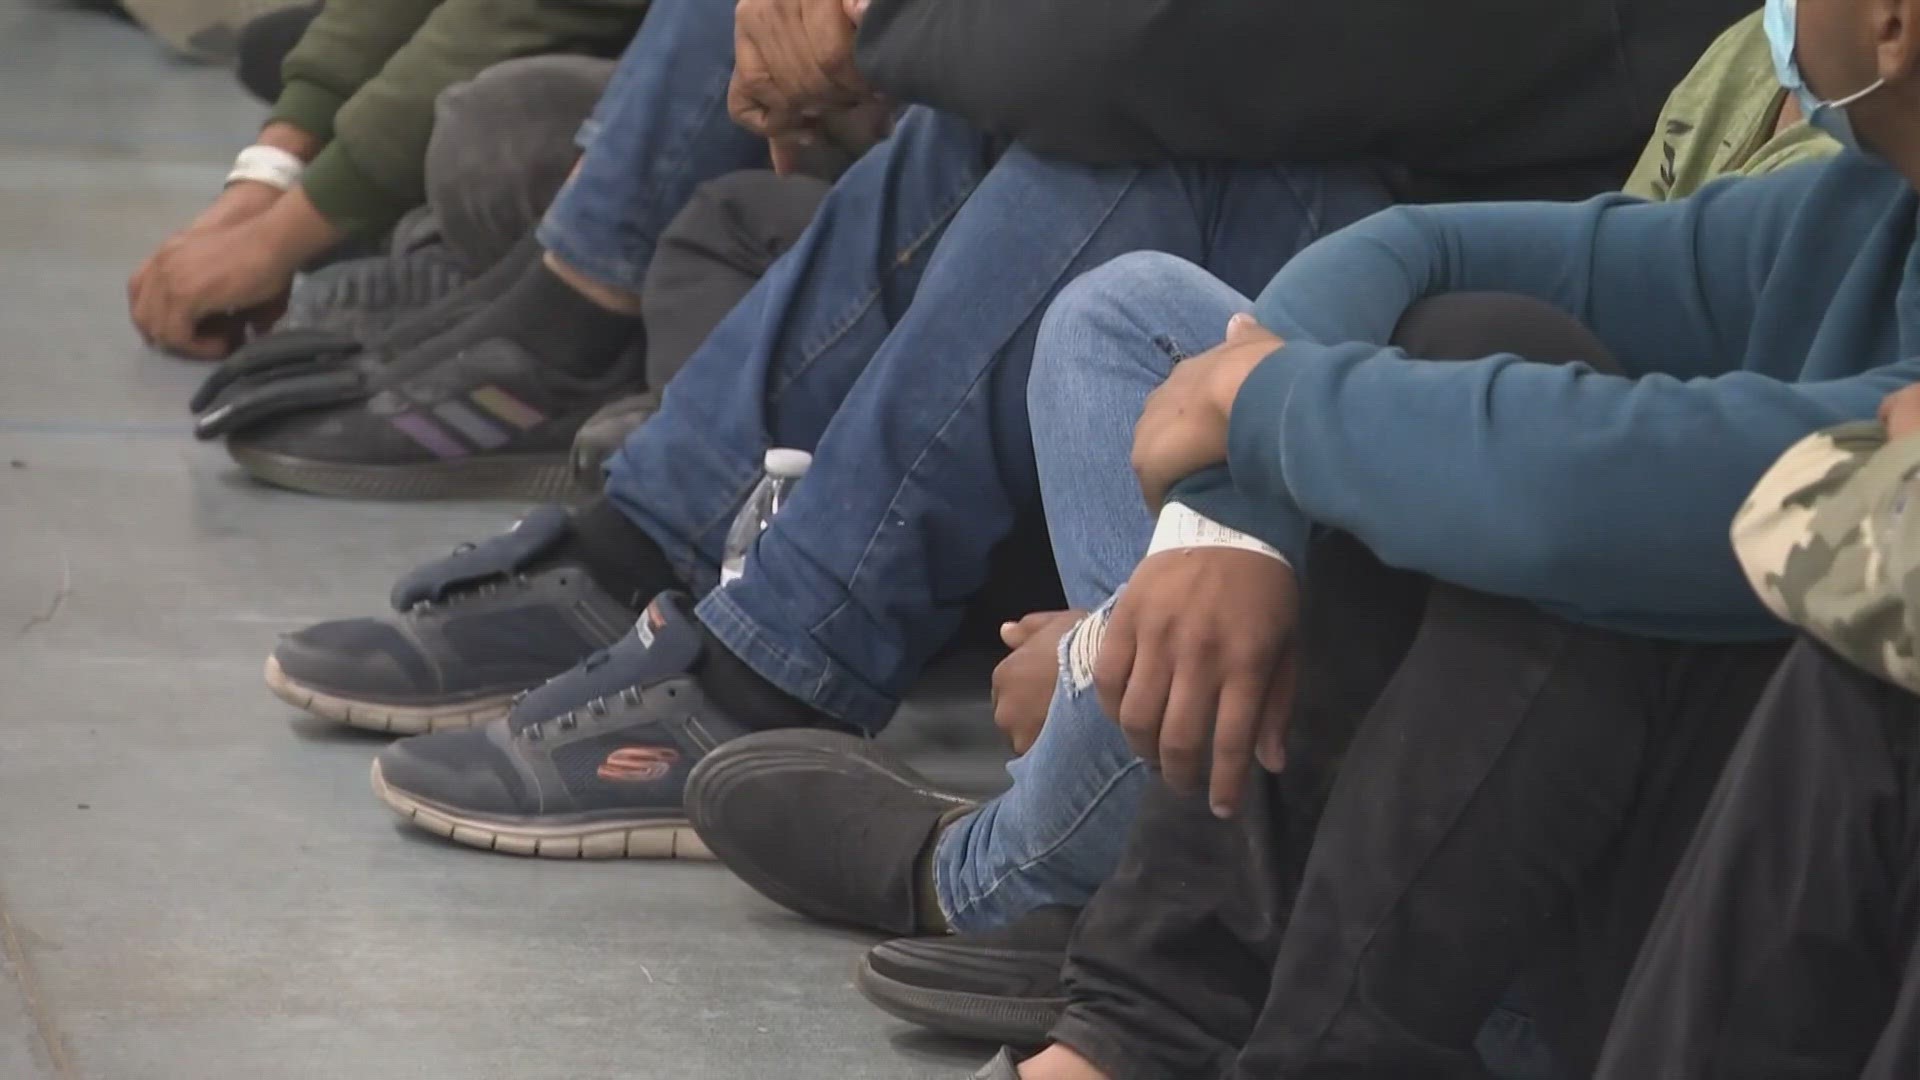 Border officials say they have apprehended more than 26,000 migrants over a 72-hour period over the weekend.